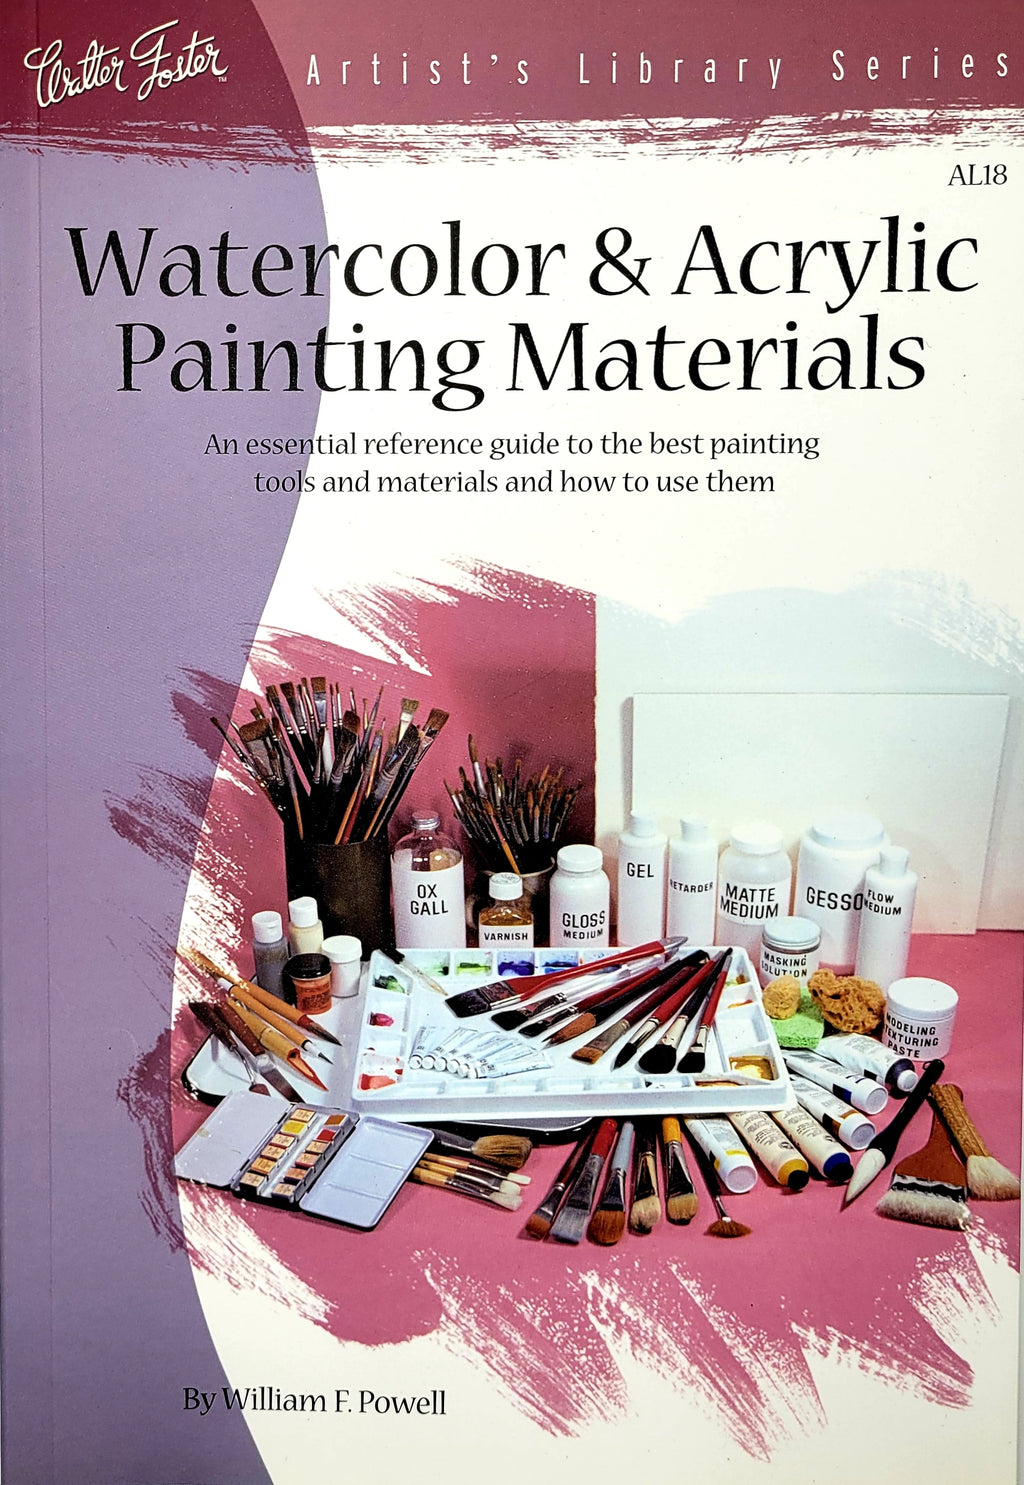 Watercolor & Acrylic Painting Materials Walter Foster Artist's Library Series